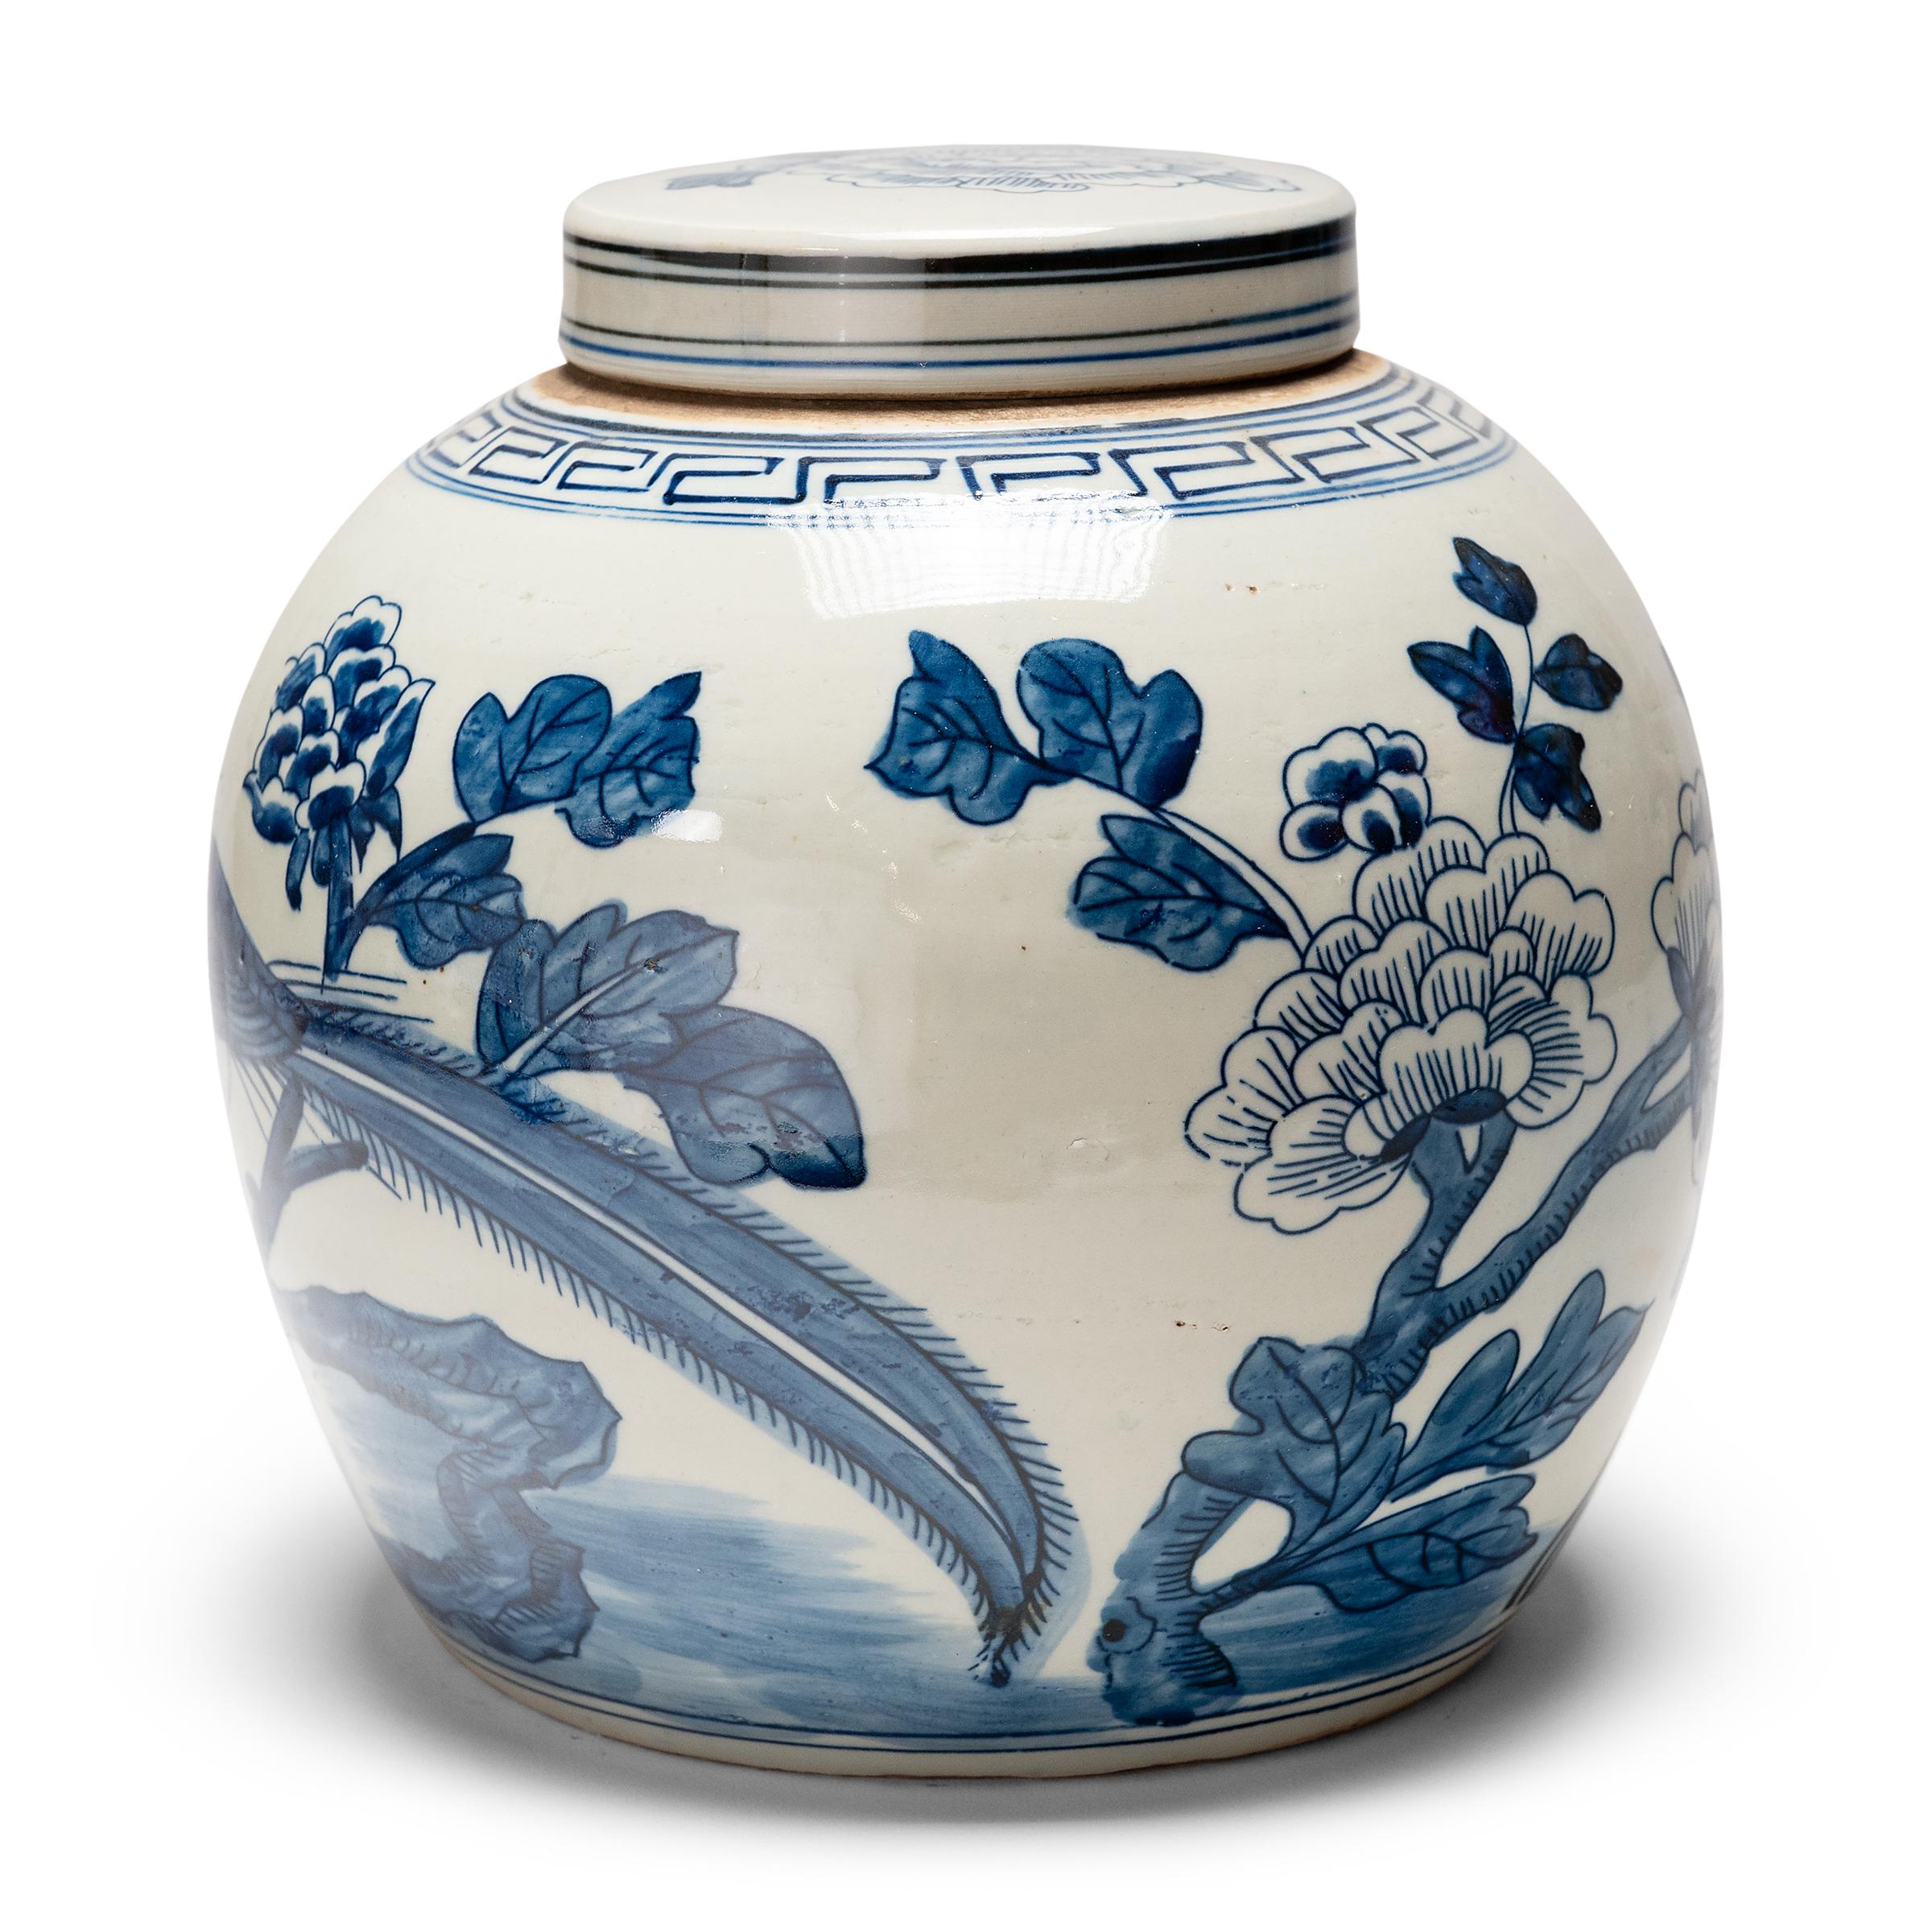 This porcelain tea leaf jar is beautifully glazed in the blue-and-white manner, with hand-painted cobalt-blue decoration against a crisp white field. The jar has a rounded form and flat lid, a traditional shape for jars used to hold Chinese tea